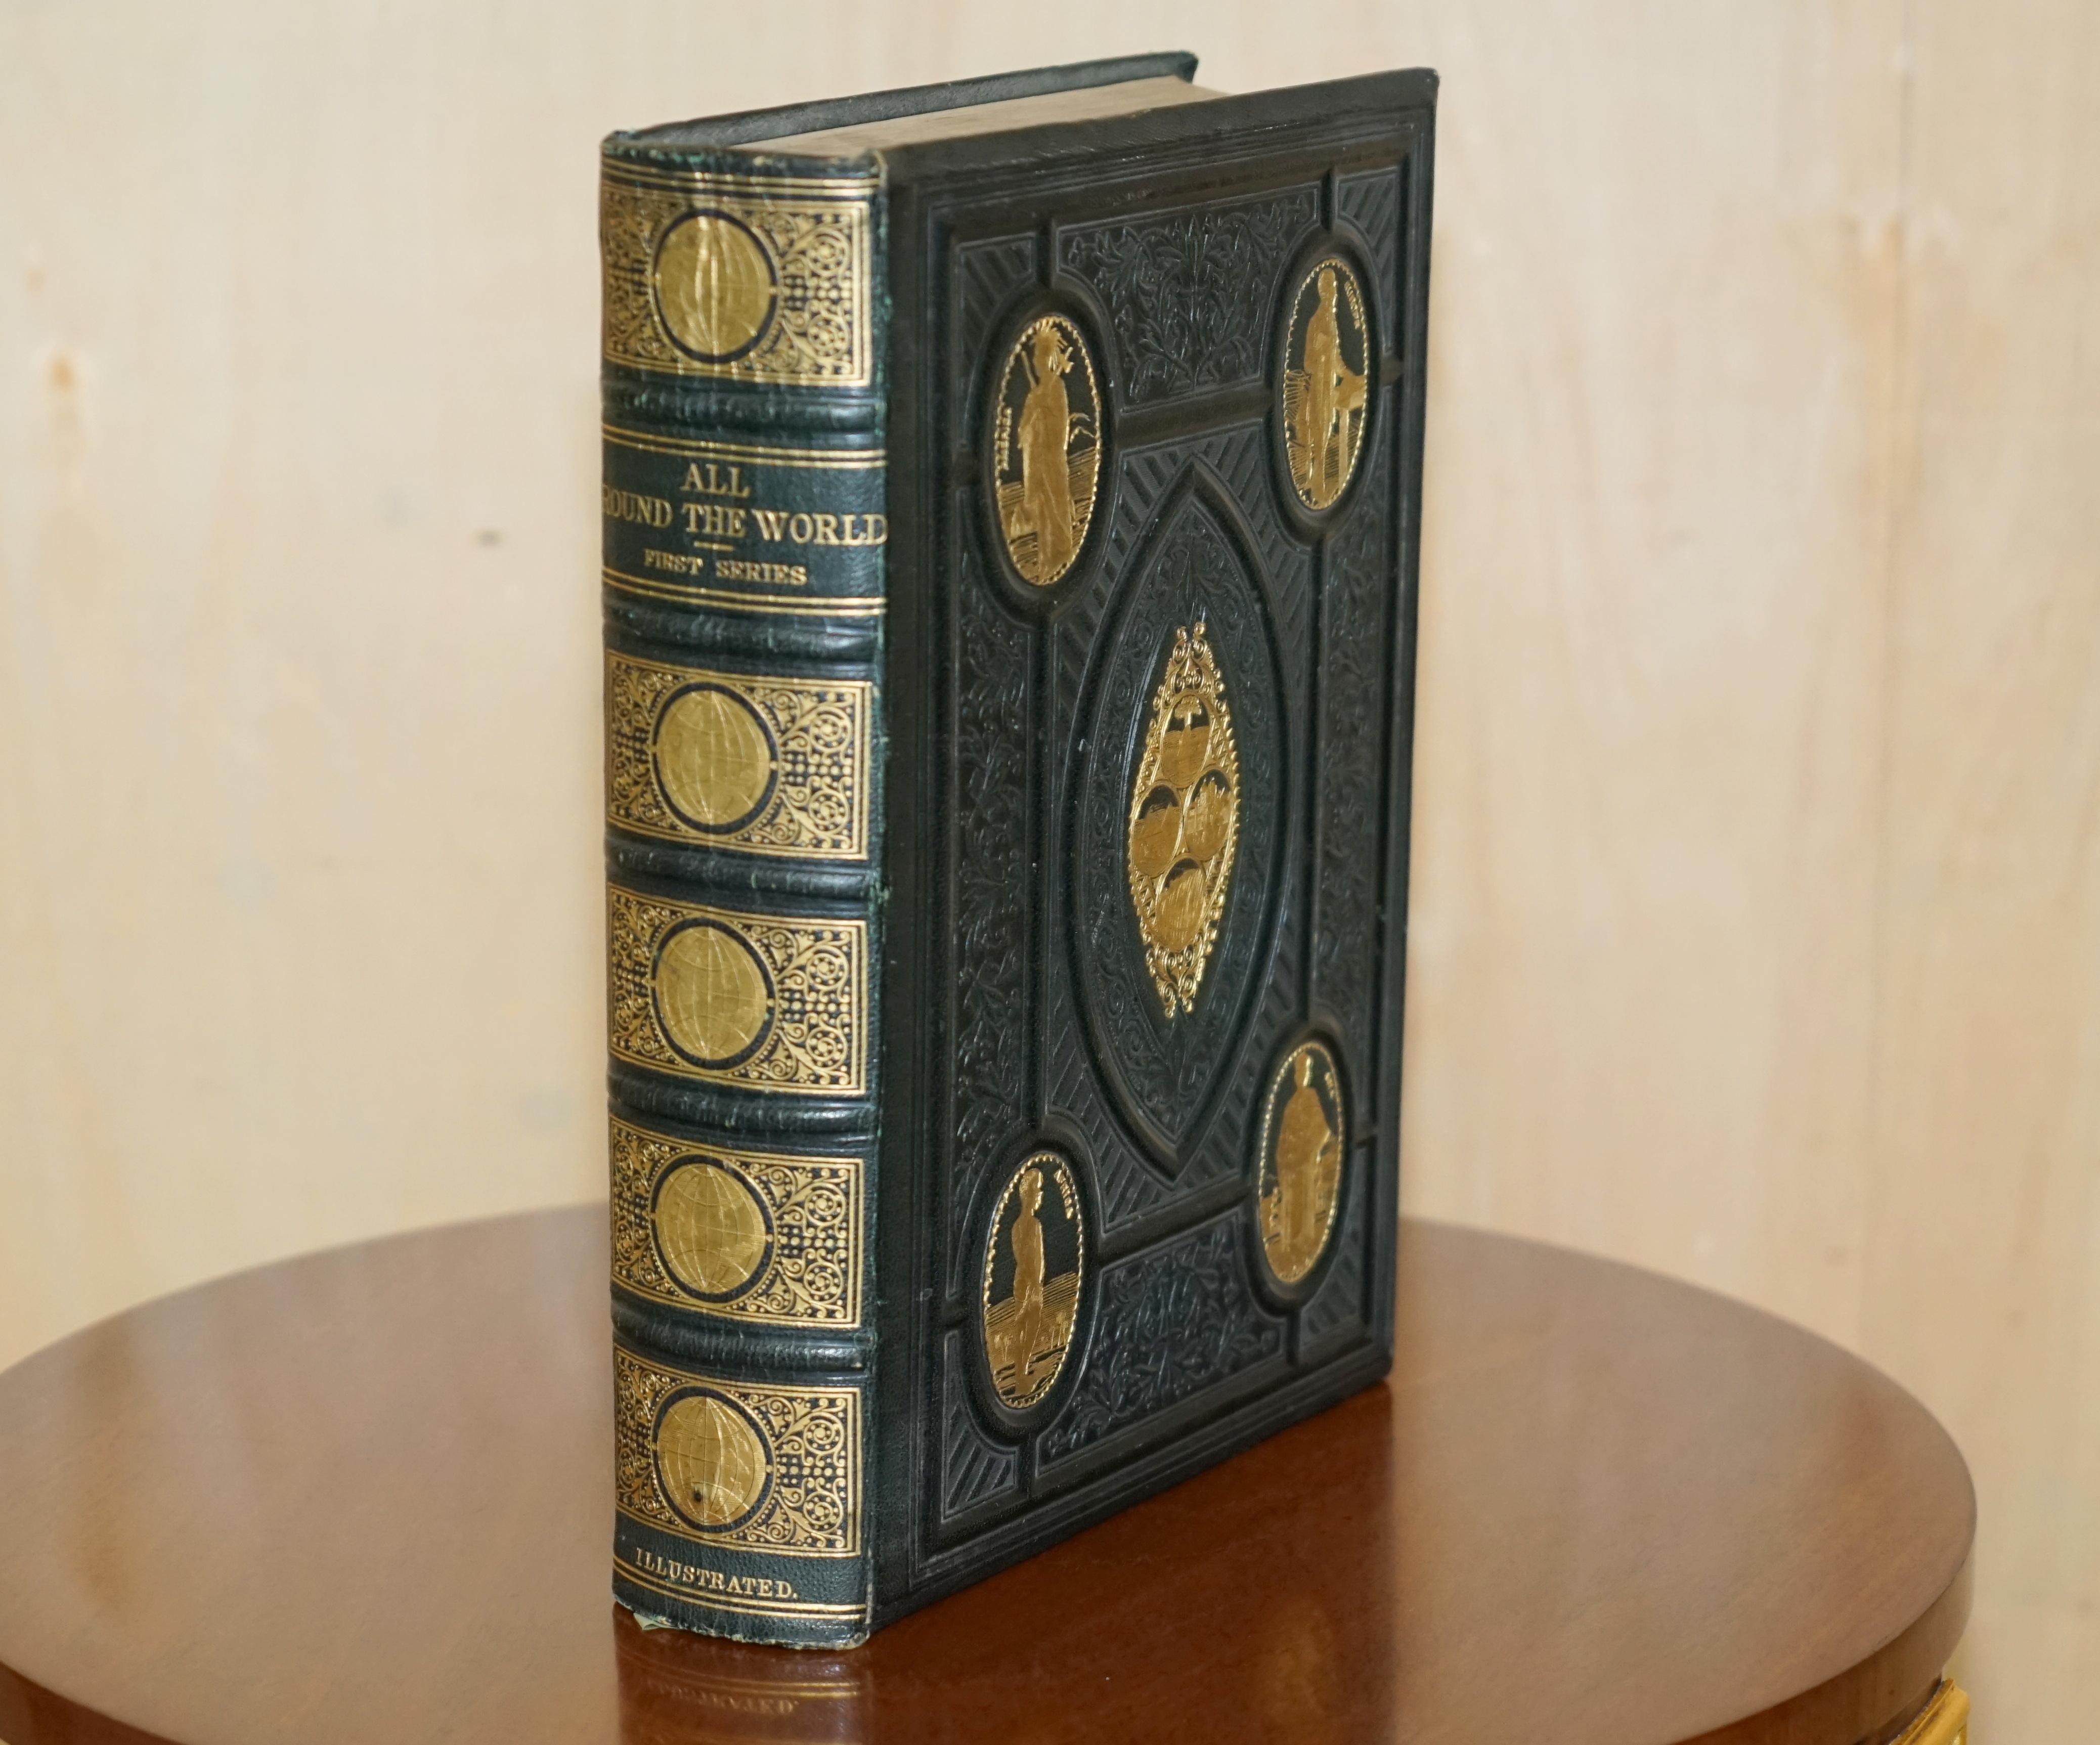 Royal House Antiques

Royal House Antiques is delighted to offer for sale this stunning All Round The World book with Figural Scenes and Topographical Etchings & Maps, published by William Collins, Sons & Co, the binding having Gilt Tooling embossed